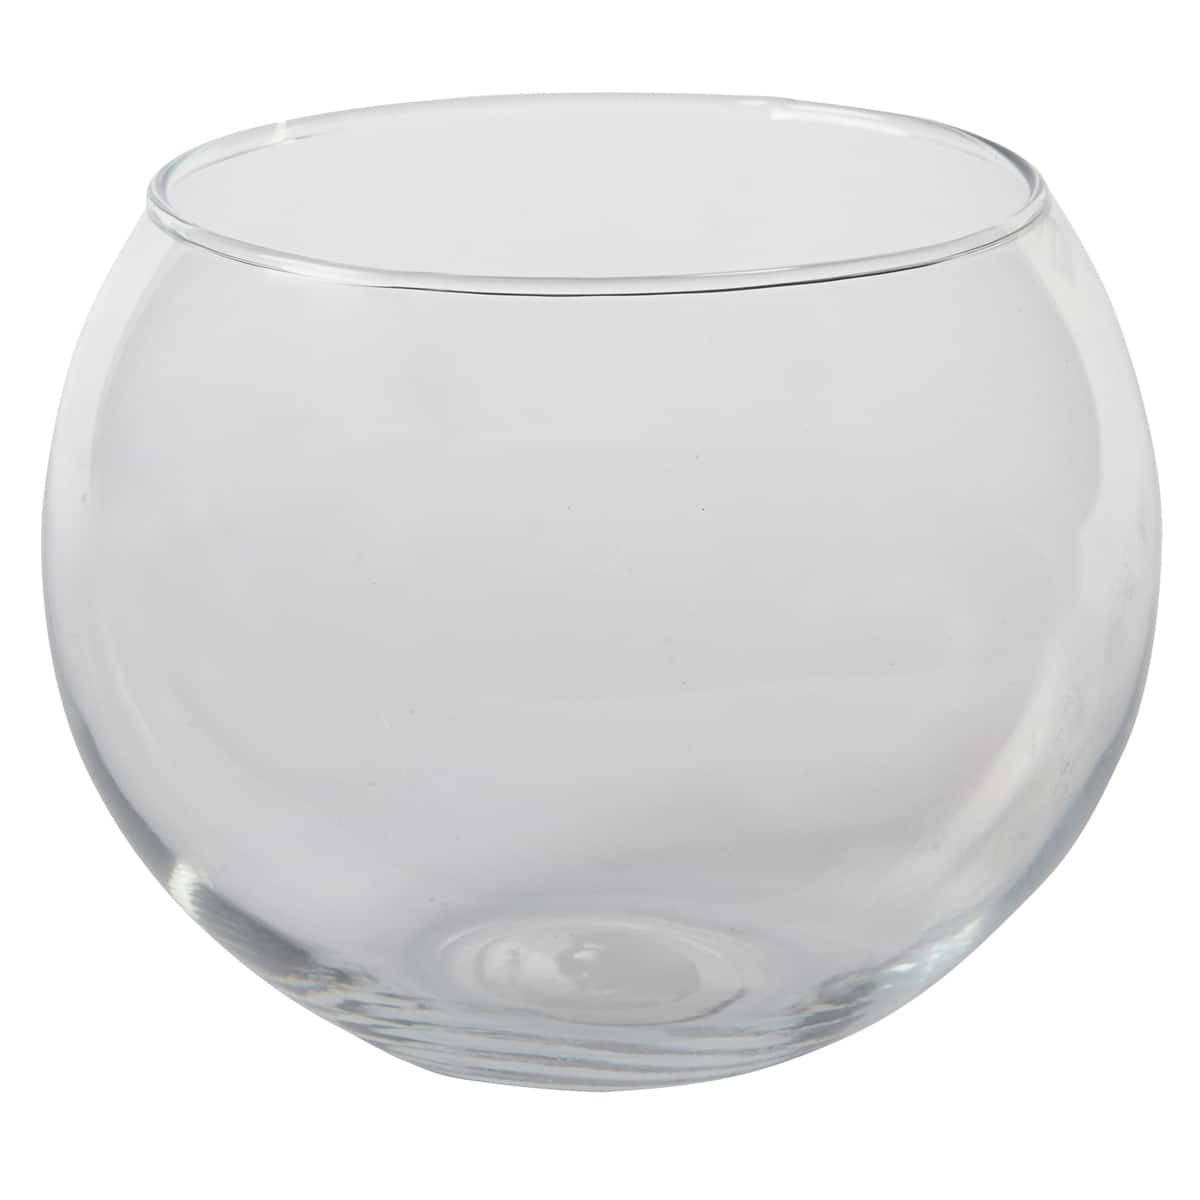 Large Glass Bowl With Lid